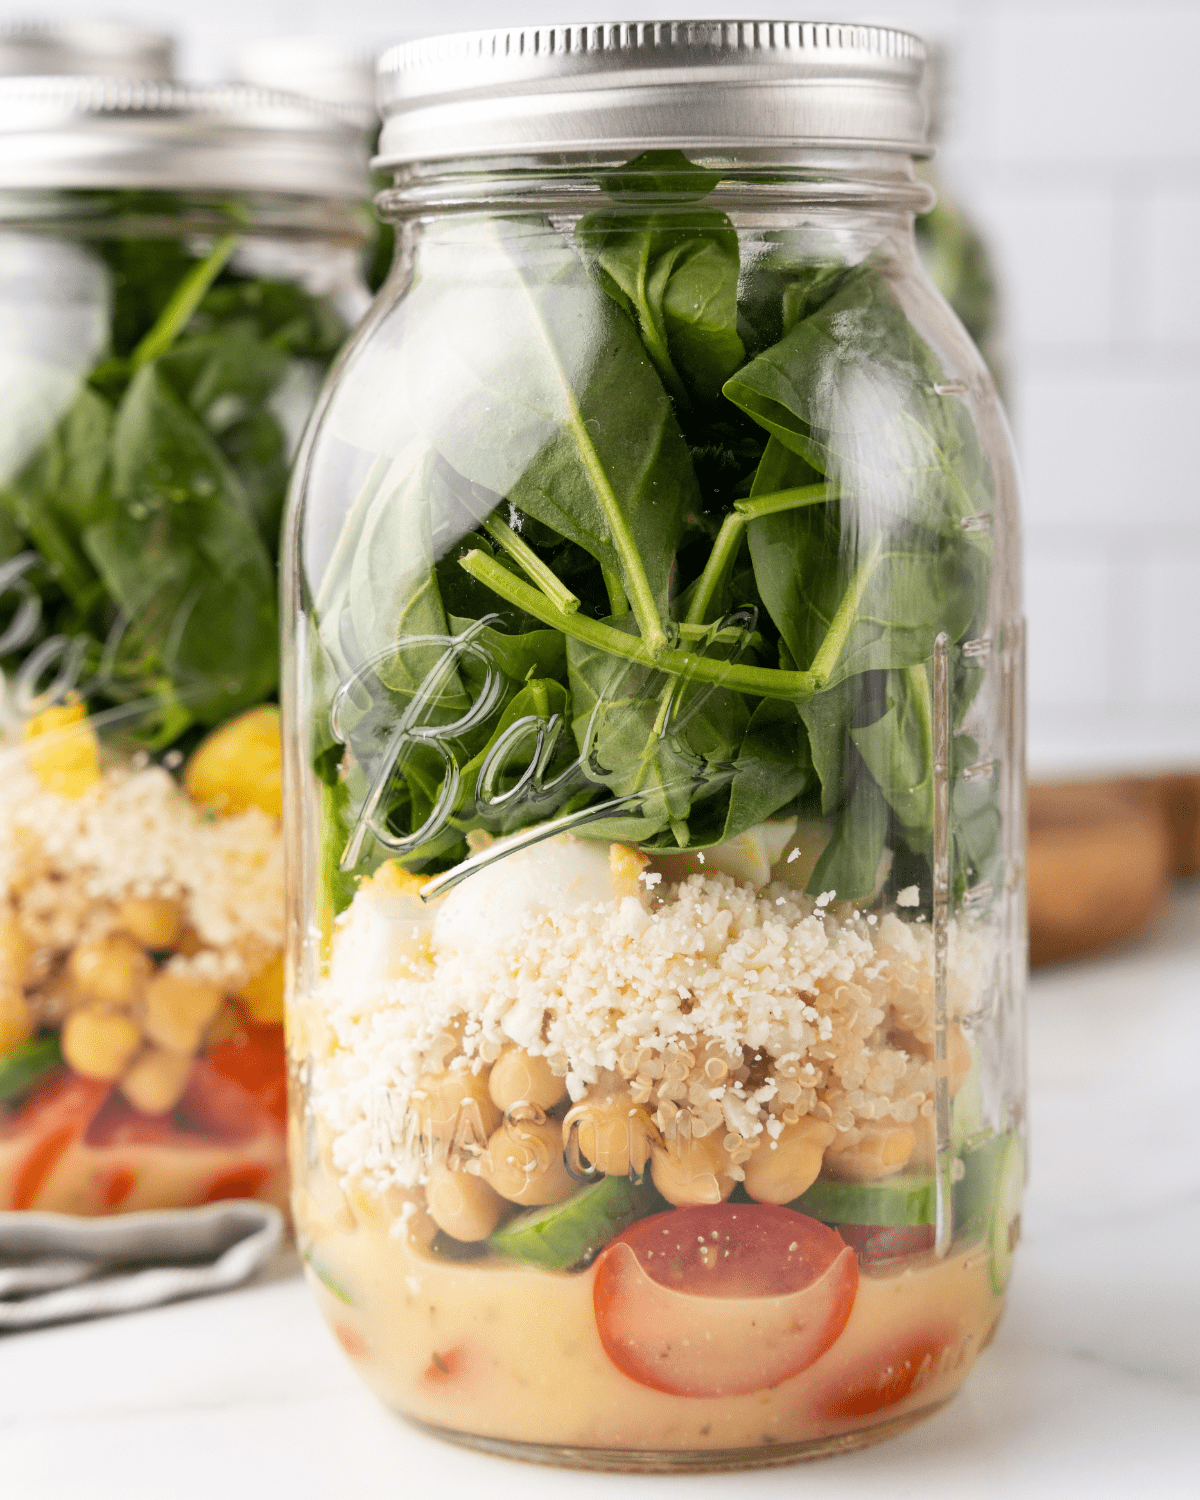 protein power mason jar salad close up picture.